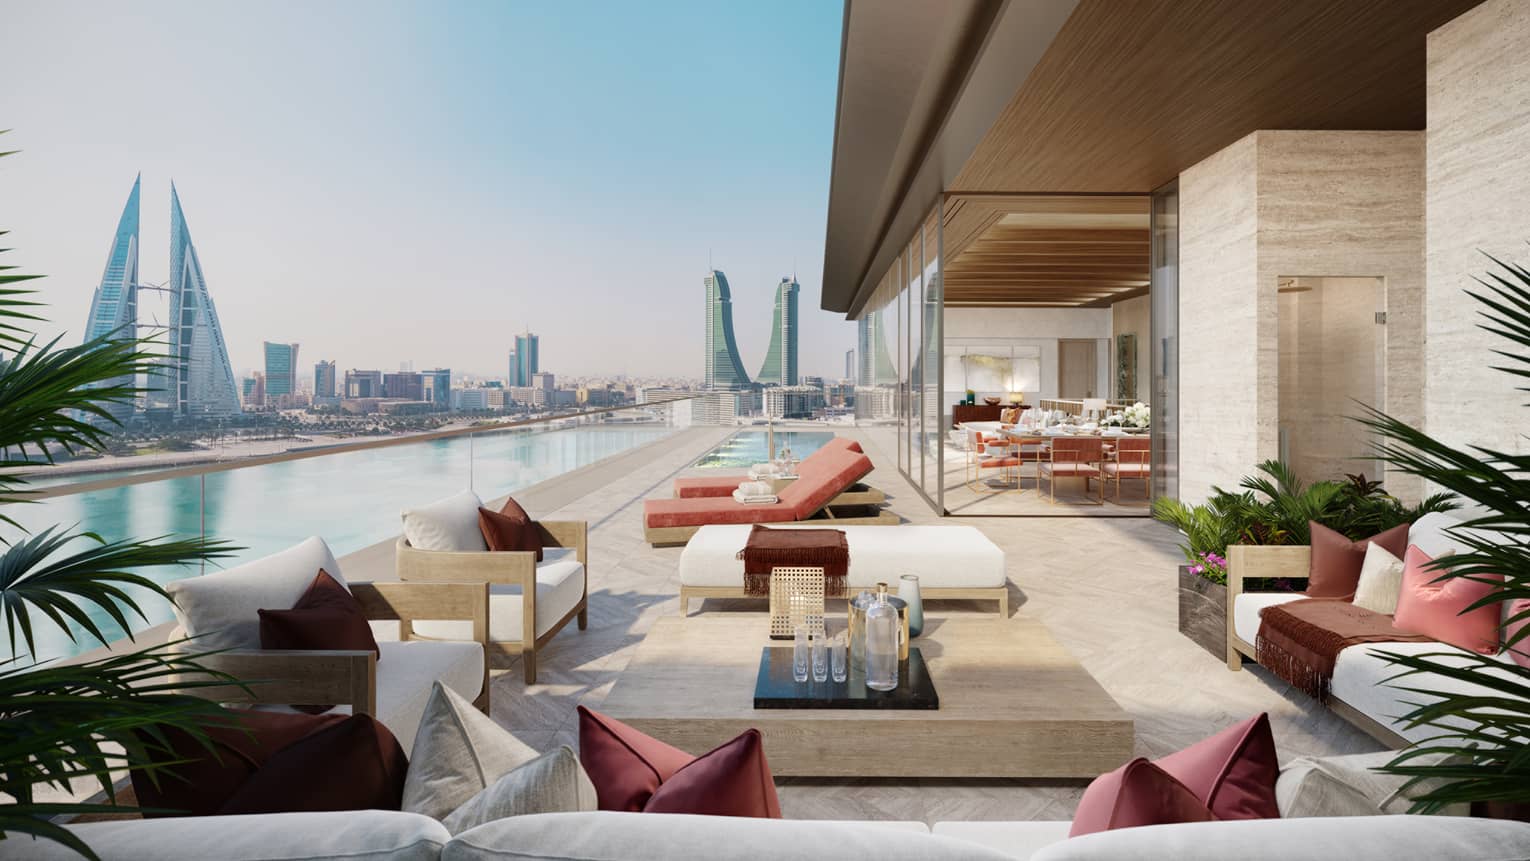 Rendering of residence pool with skyline in background